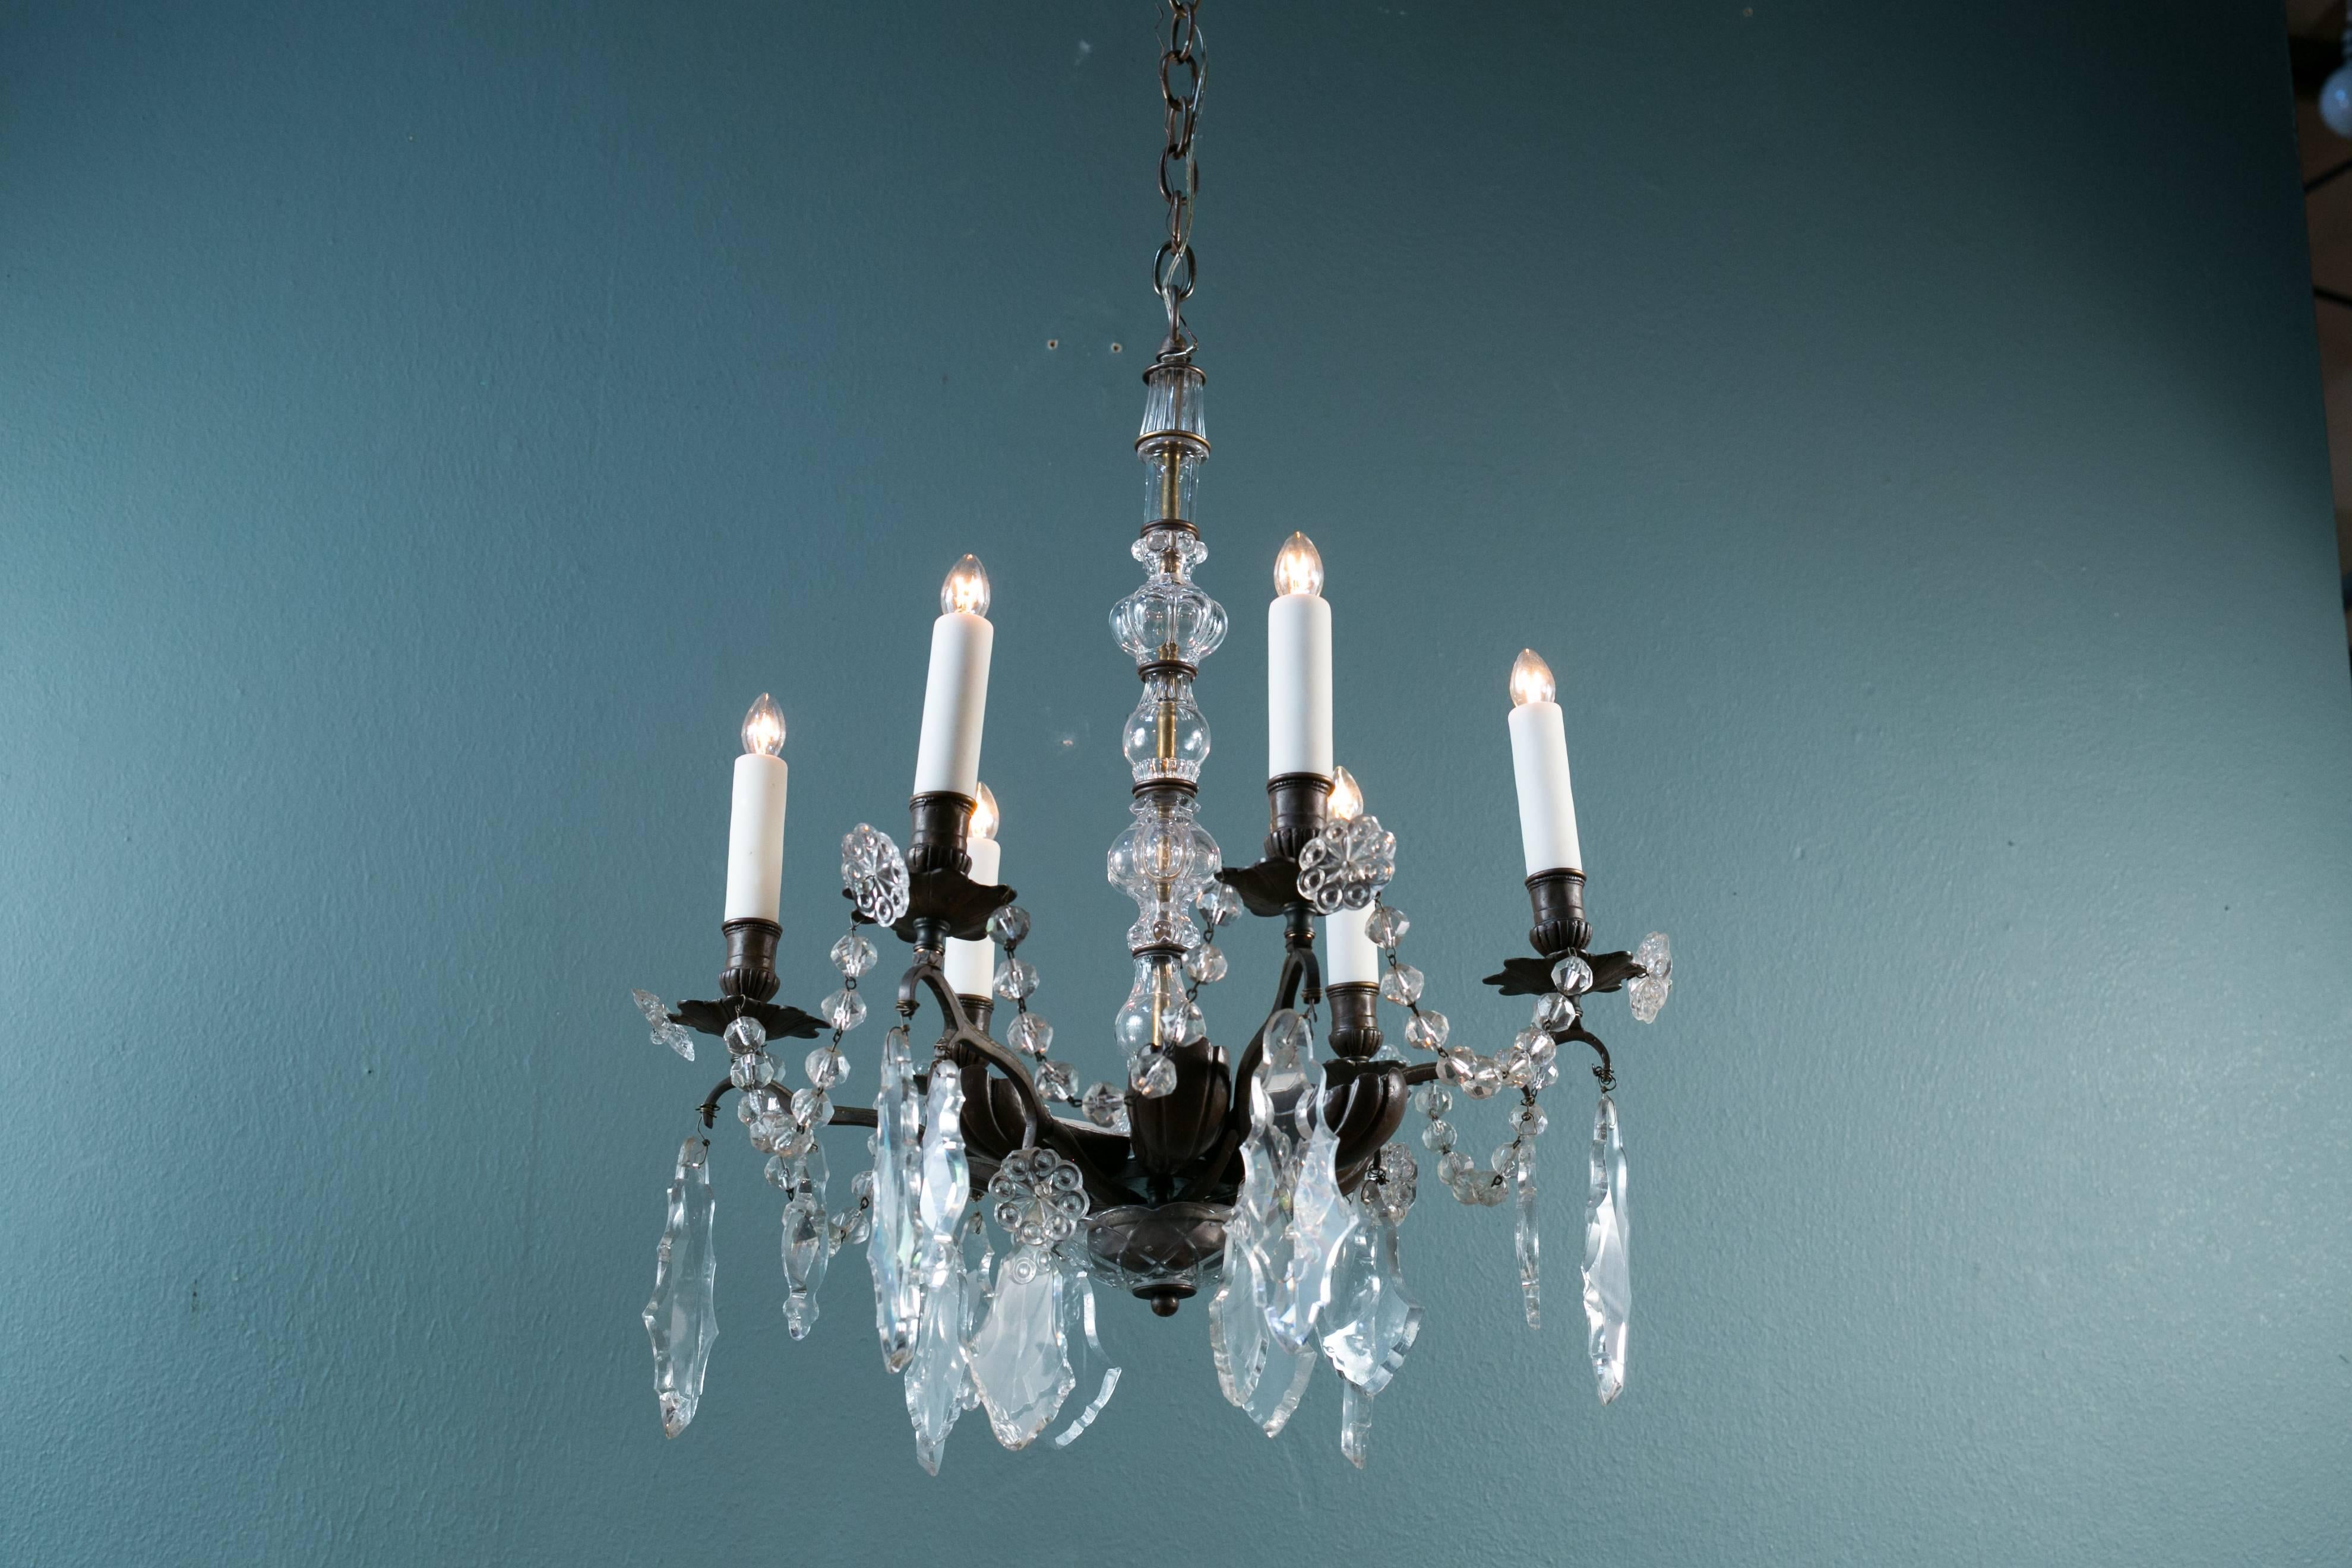 Cast Bronze and Crystal Chandelier from France circa 1890